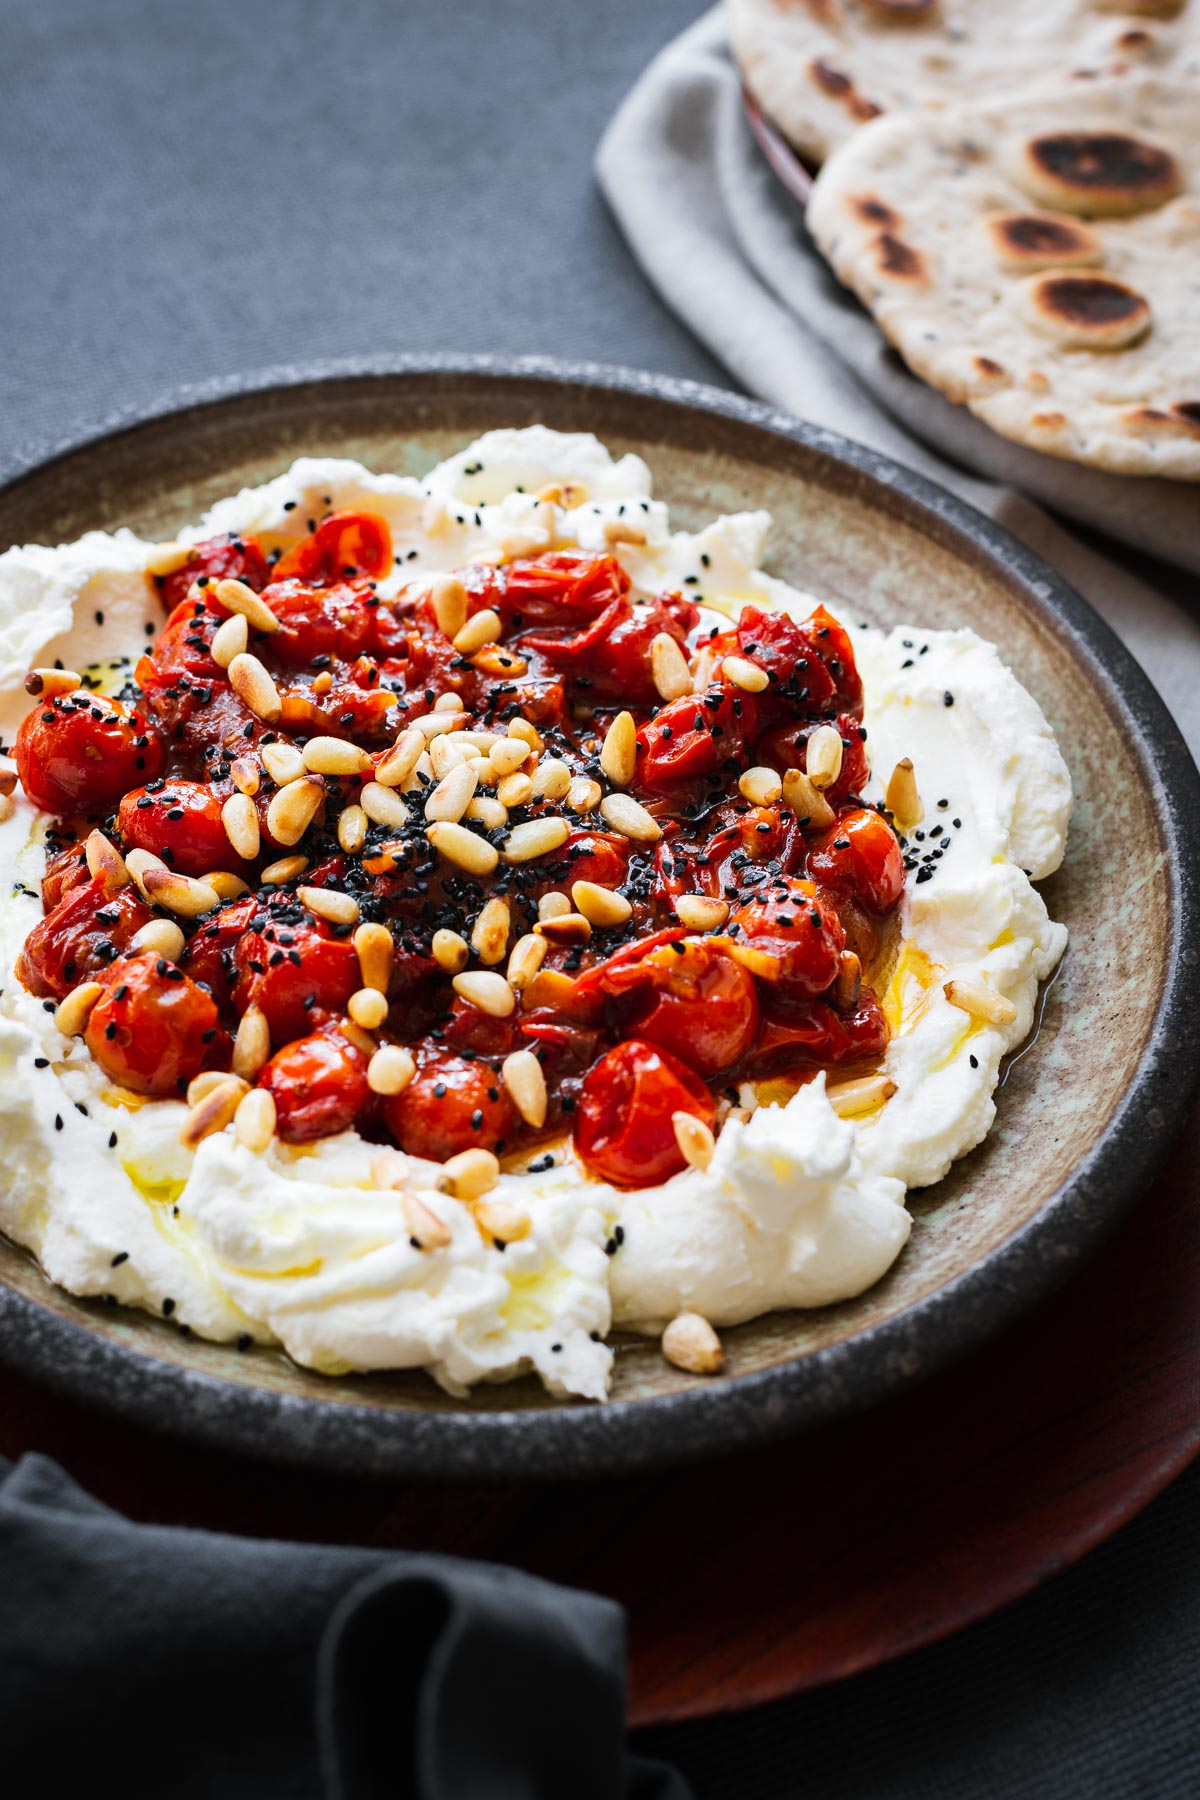 Spicy harissa tomatoes on homemade labneh with flatbreads to enjoy as an appetiser.